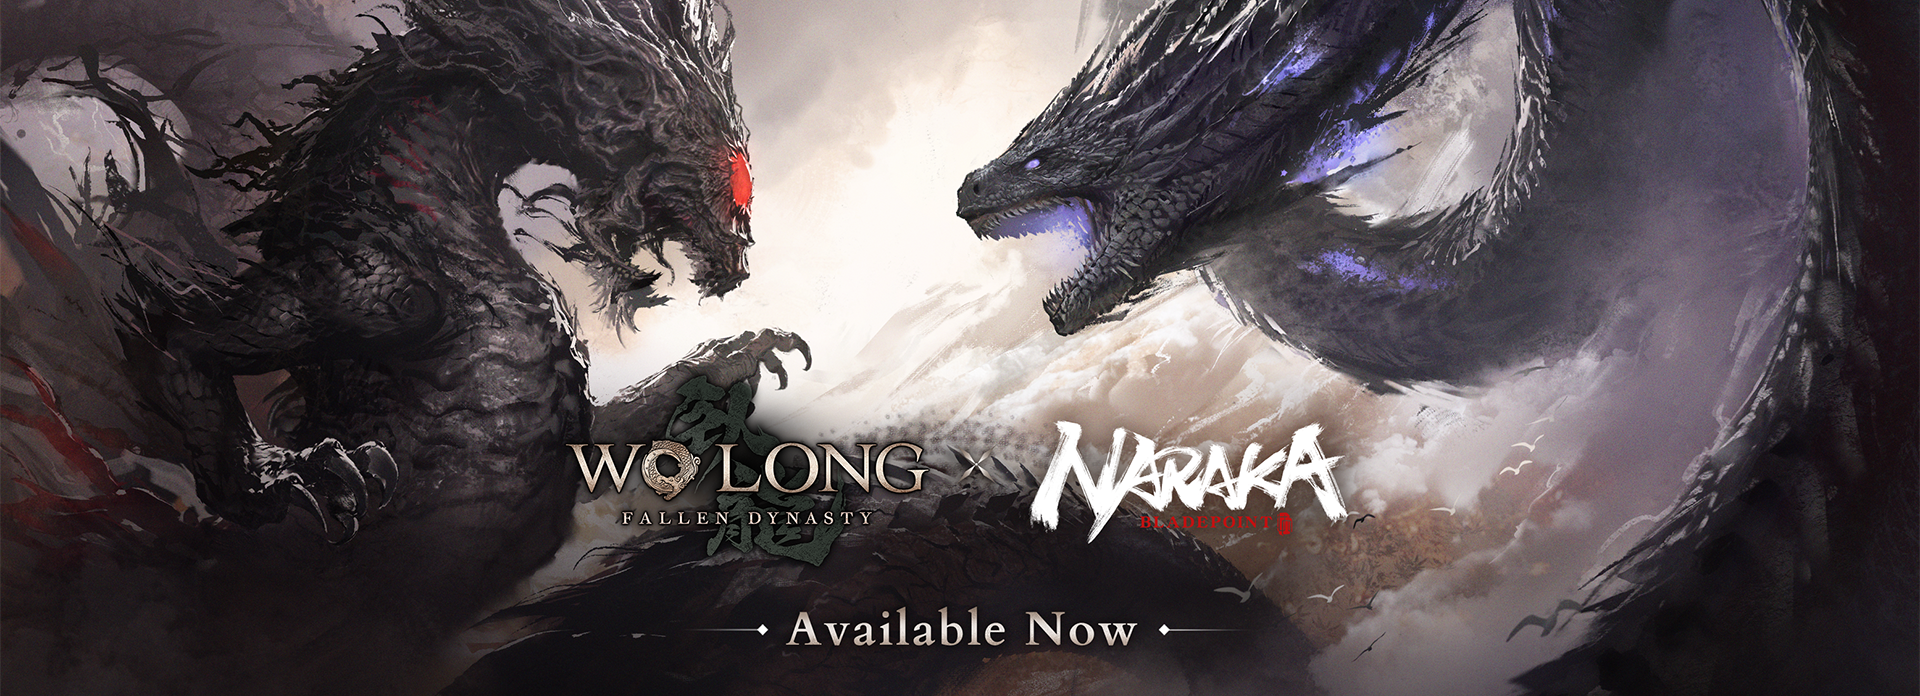 WO LONG: FALLEN DYNASTY MERGES WITH NARAKA: BLADEPOINT IN NEW CROSSOVER